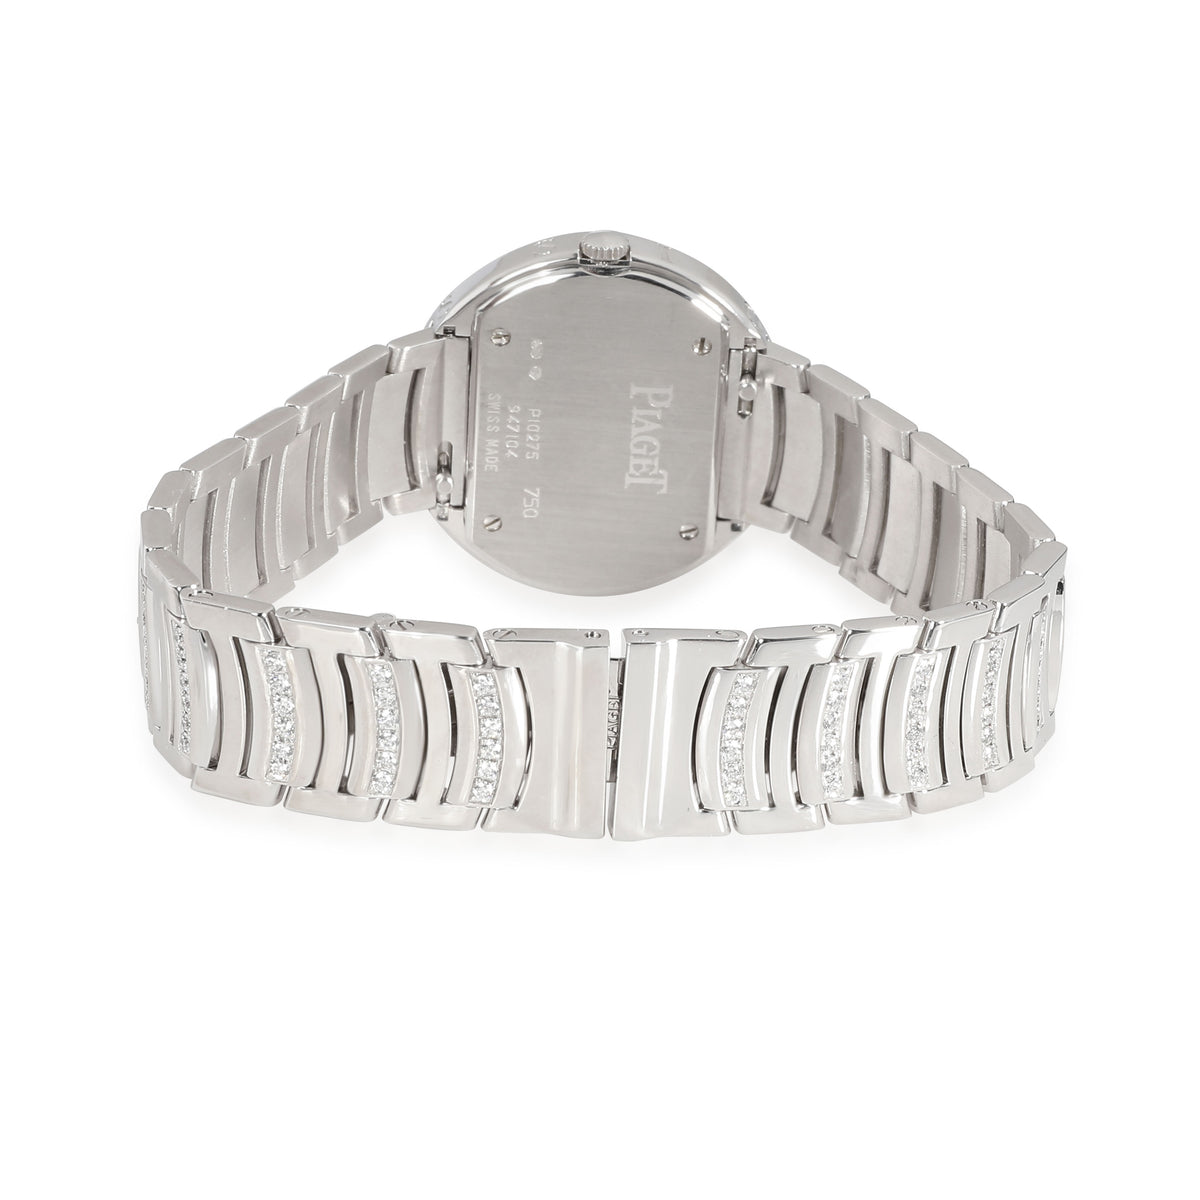 Piaget Possession GOA30086 Women's Watch in 18kt White Gold